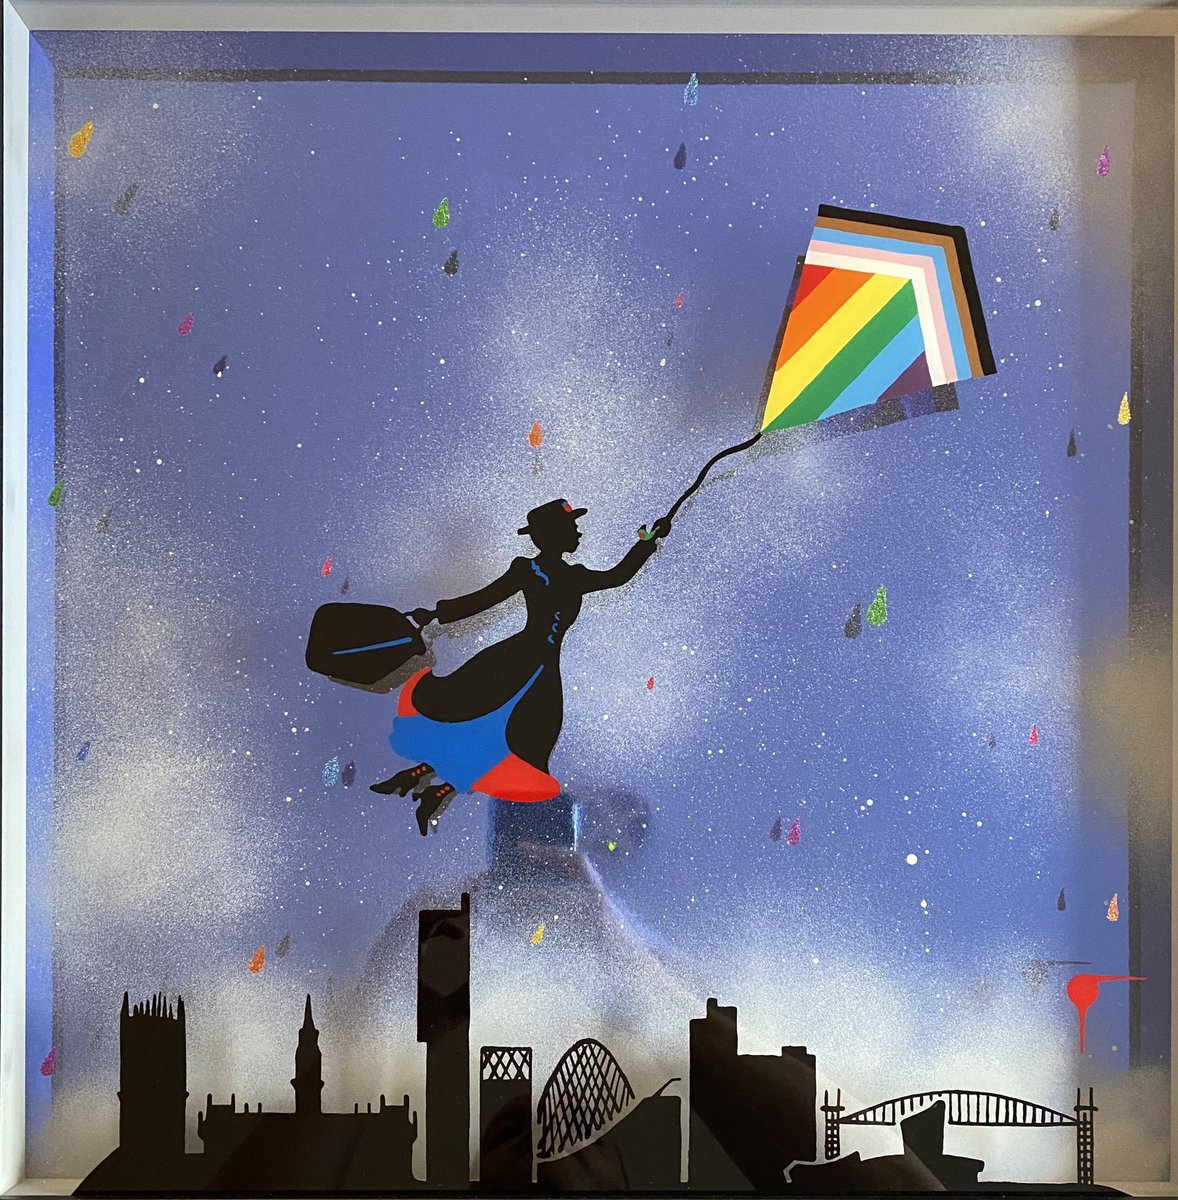 Mary Poppins flying over the Manchester skyline on the inclusive rainbow flag with reflective background and rainbow glitter raindrops! Better than I ever saw in my head! Thank you so much @CJTaylordArt for this amazing piece! 🖤🤍❤️🧡💛💚💙💜